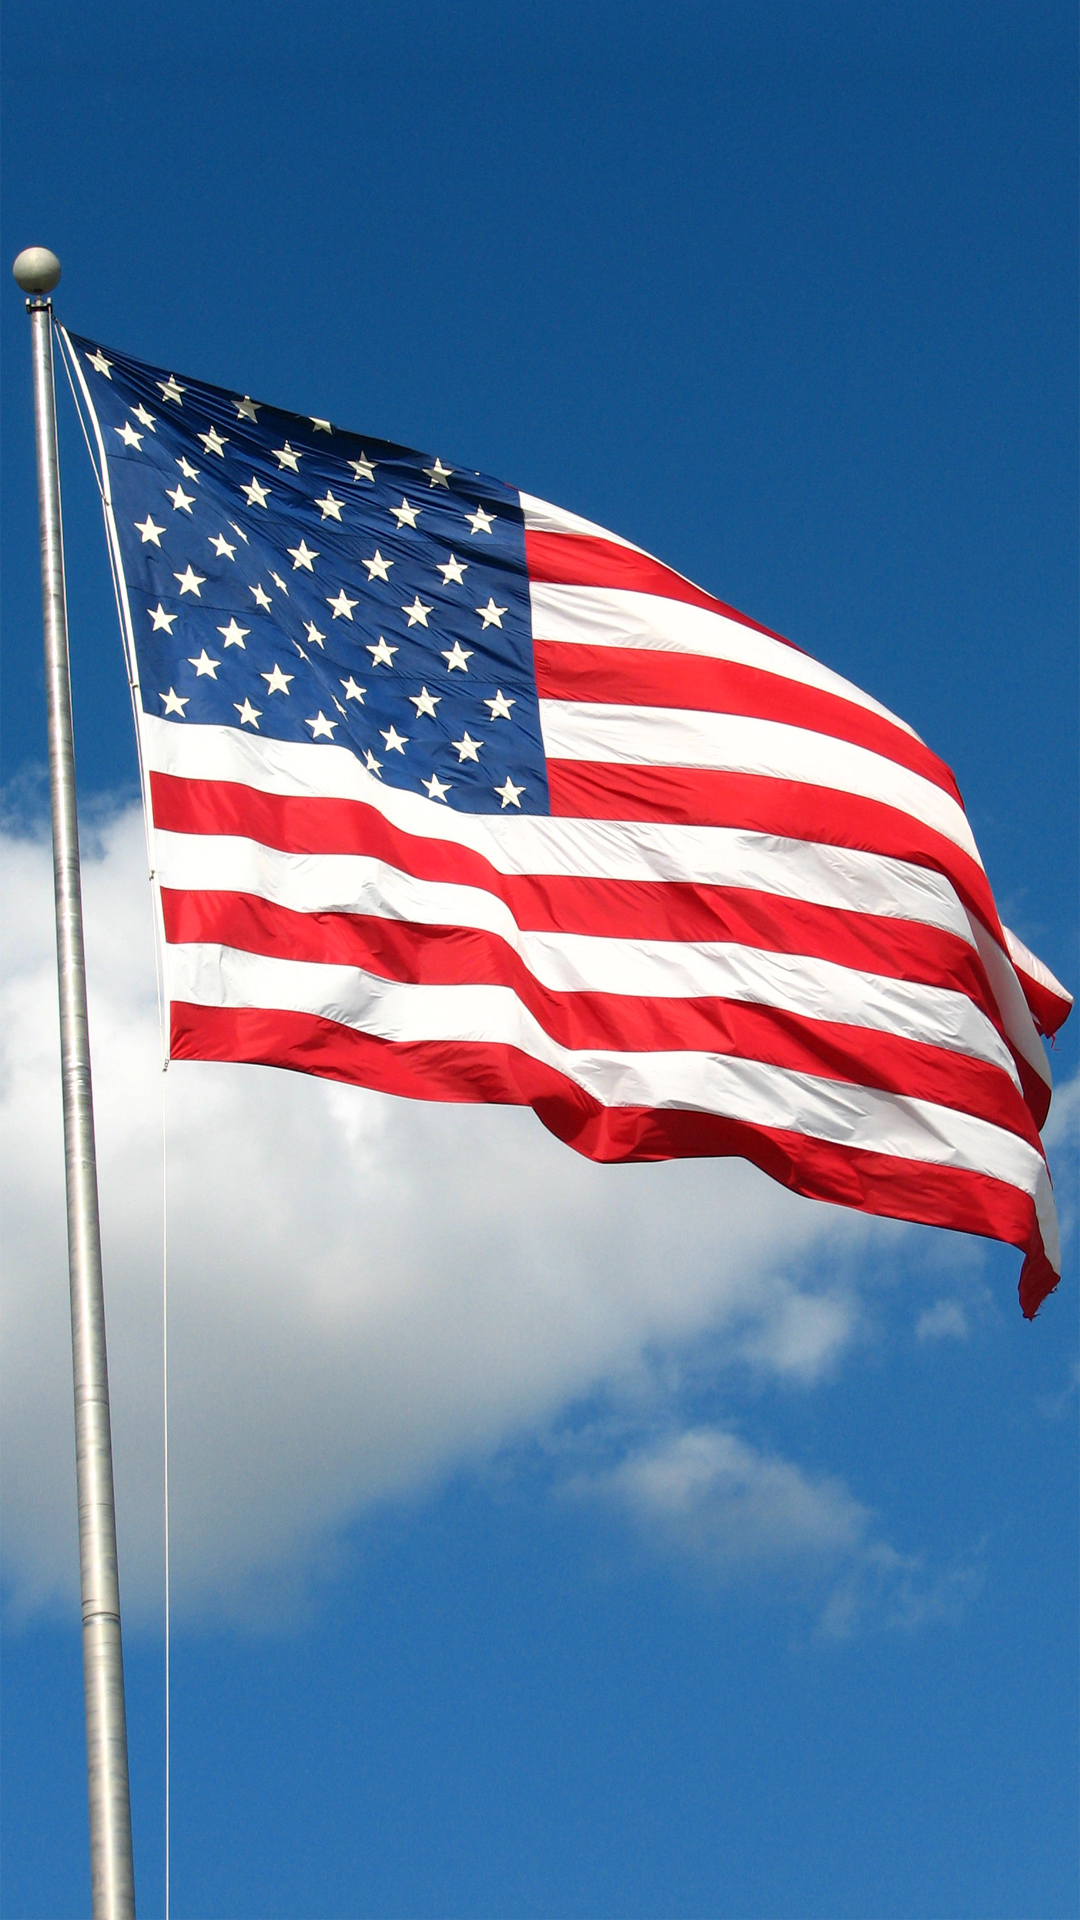 American Flag htc one wallpaper - Best htc one wallpapers, free ...